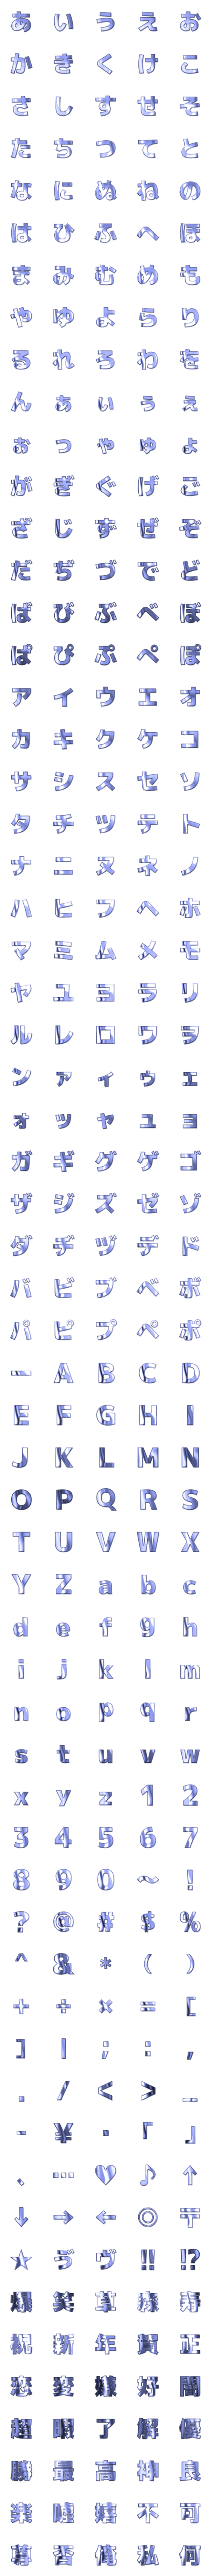 [LINE絵文字]シンプルメタリック文字 -ゴシック体-の画像一覧